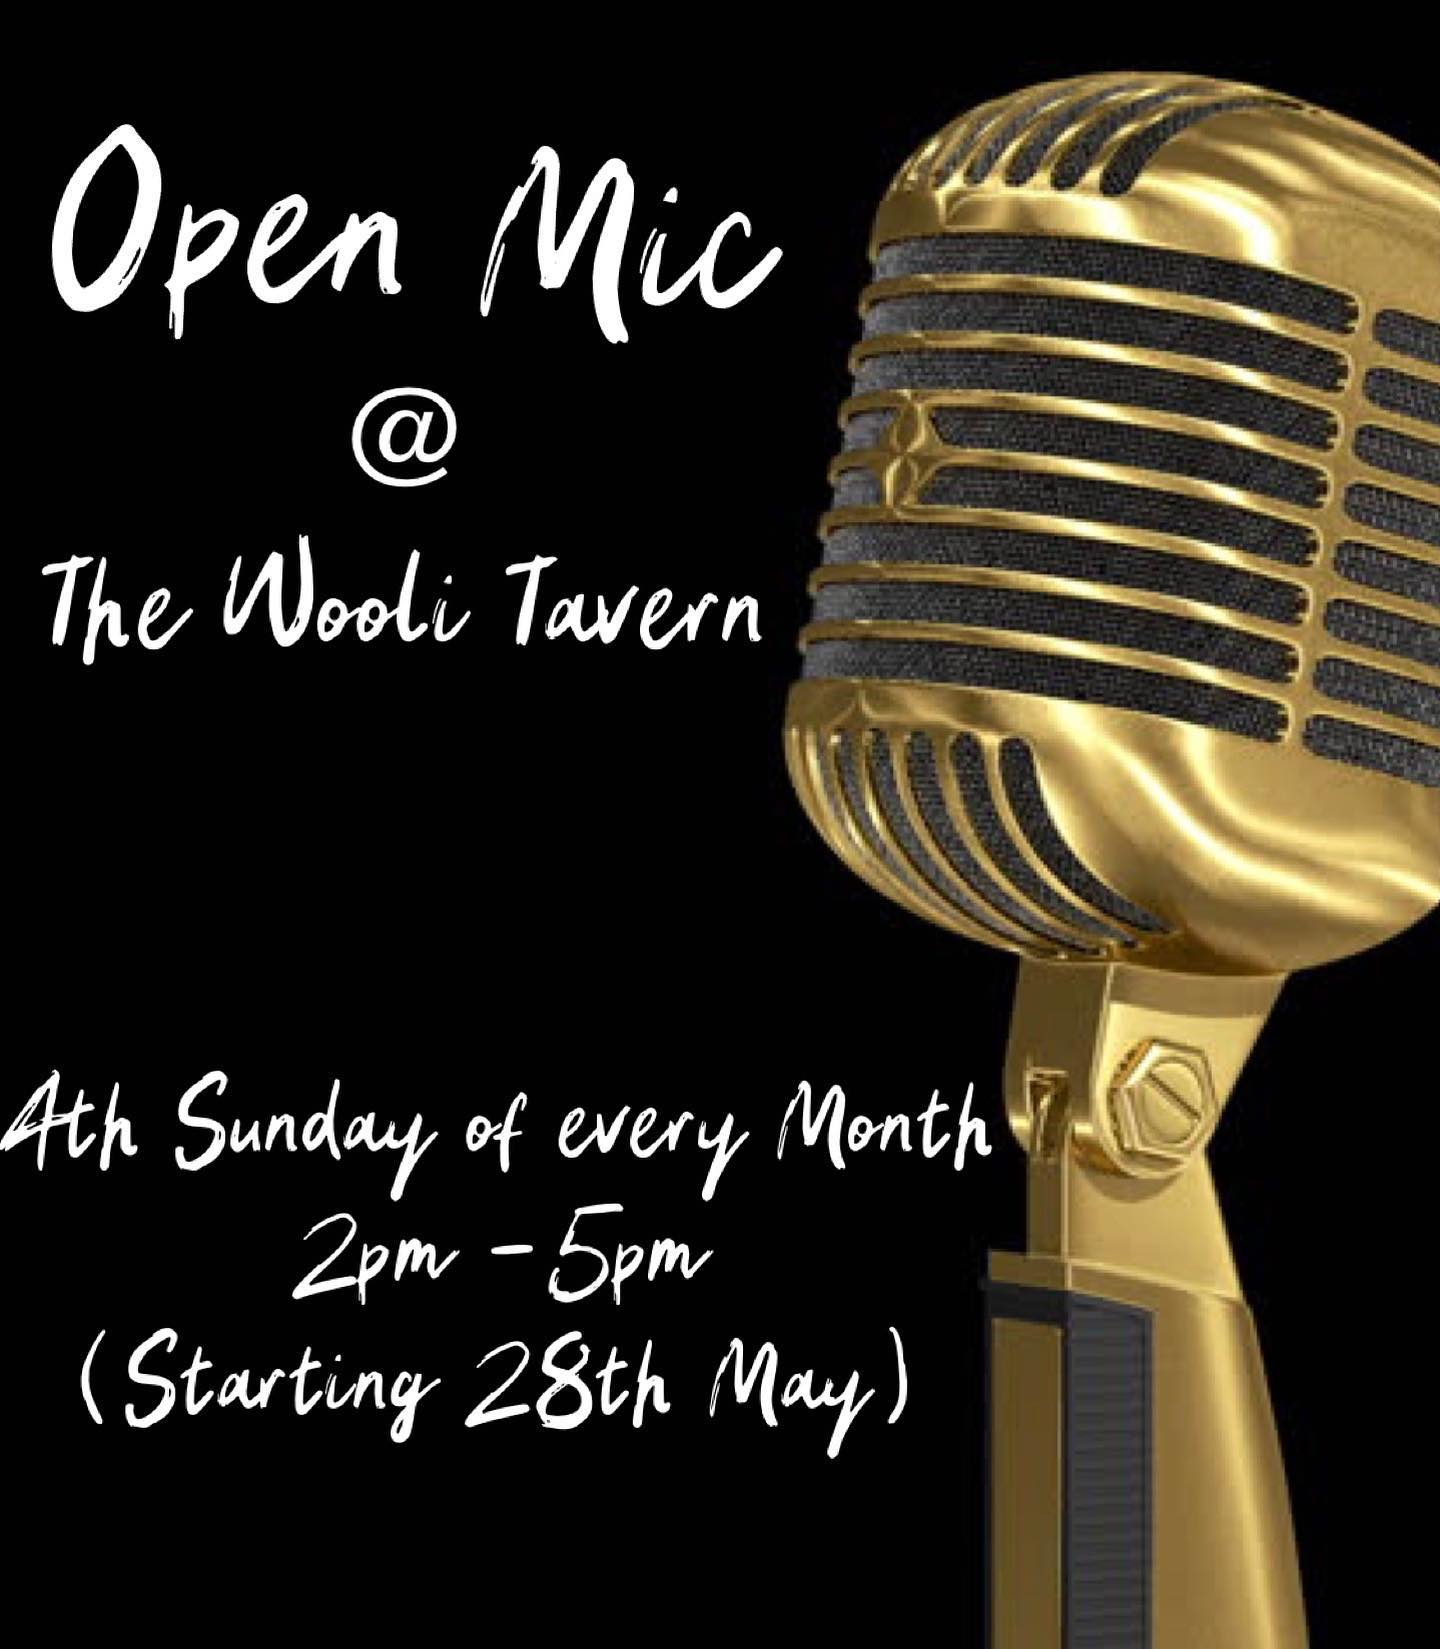 The Wooli Tavern - Open Mic takes places the last sunday of every month from 2.00pm